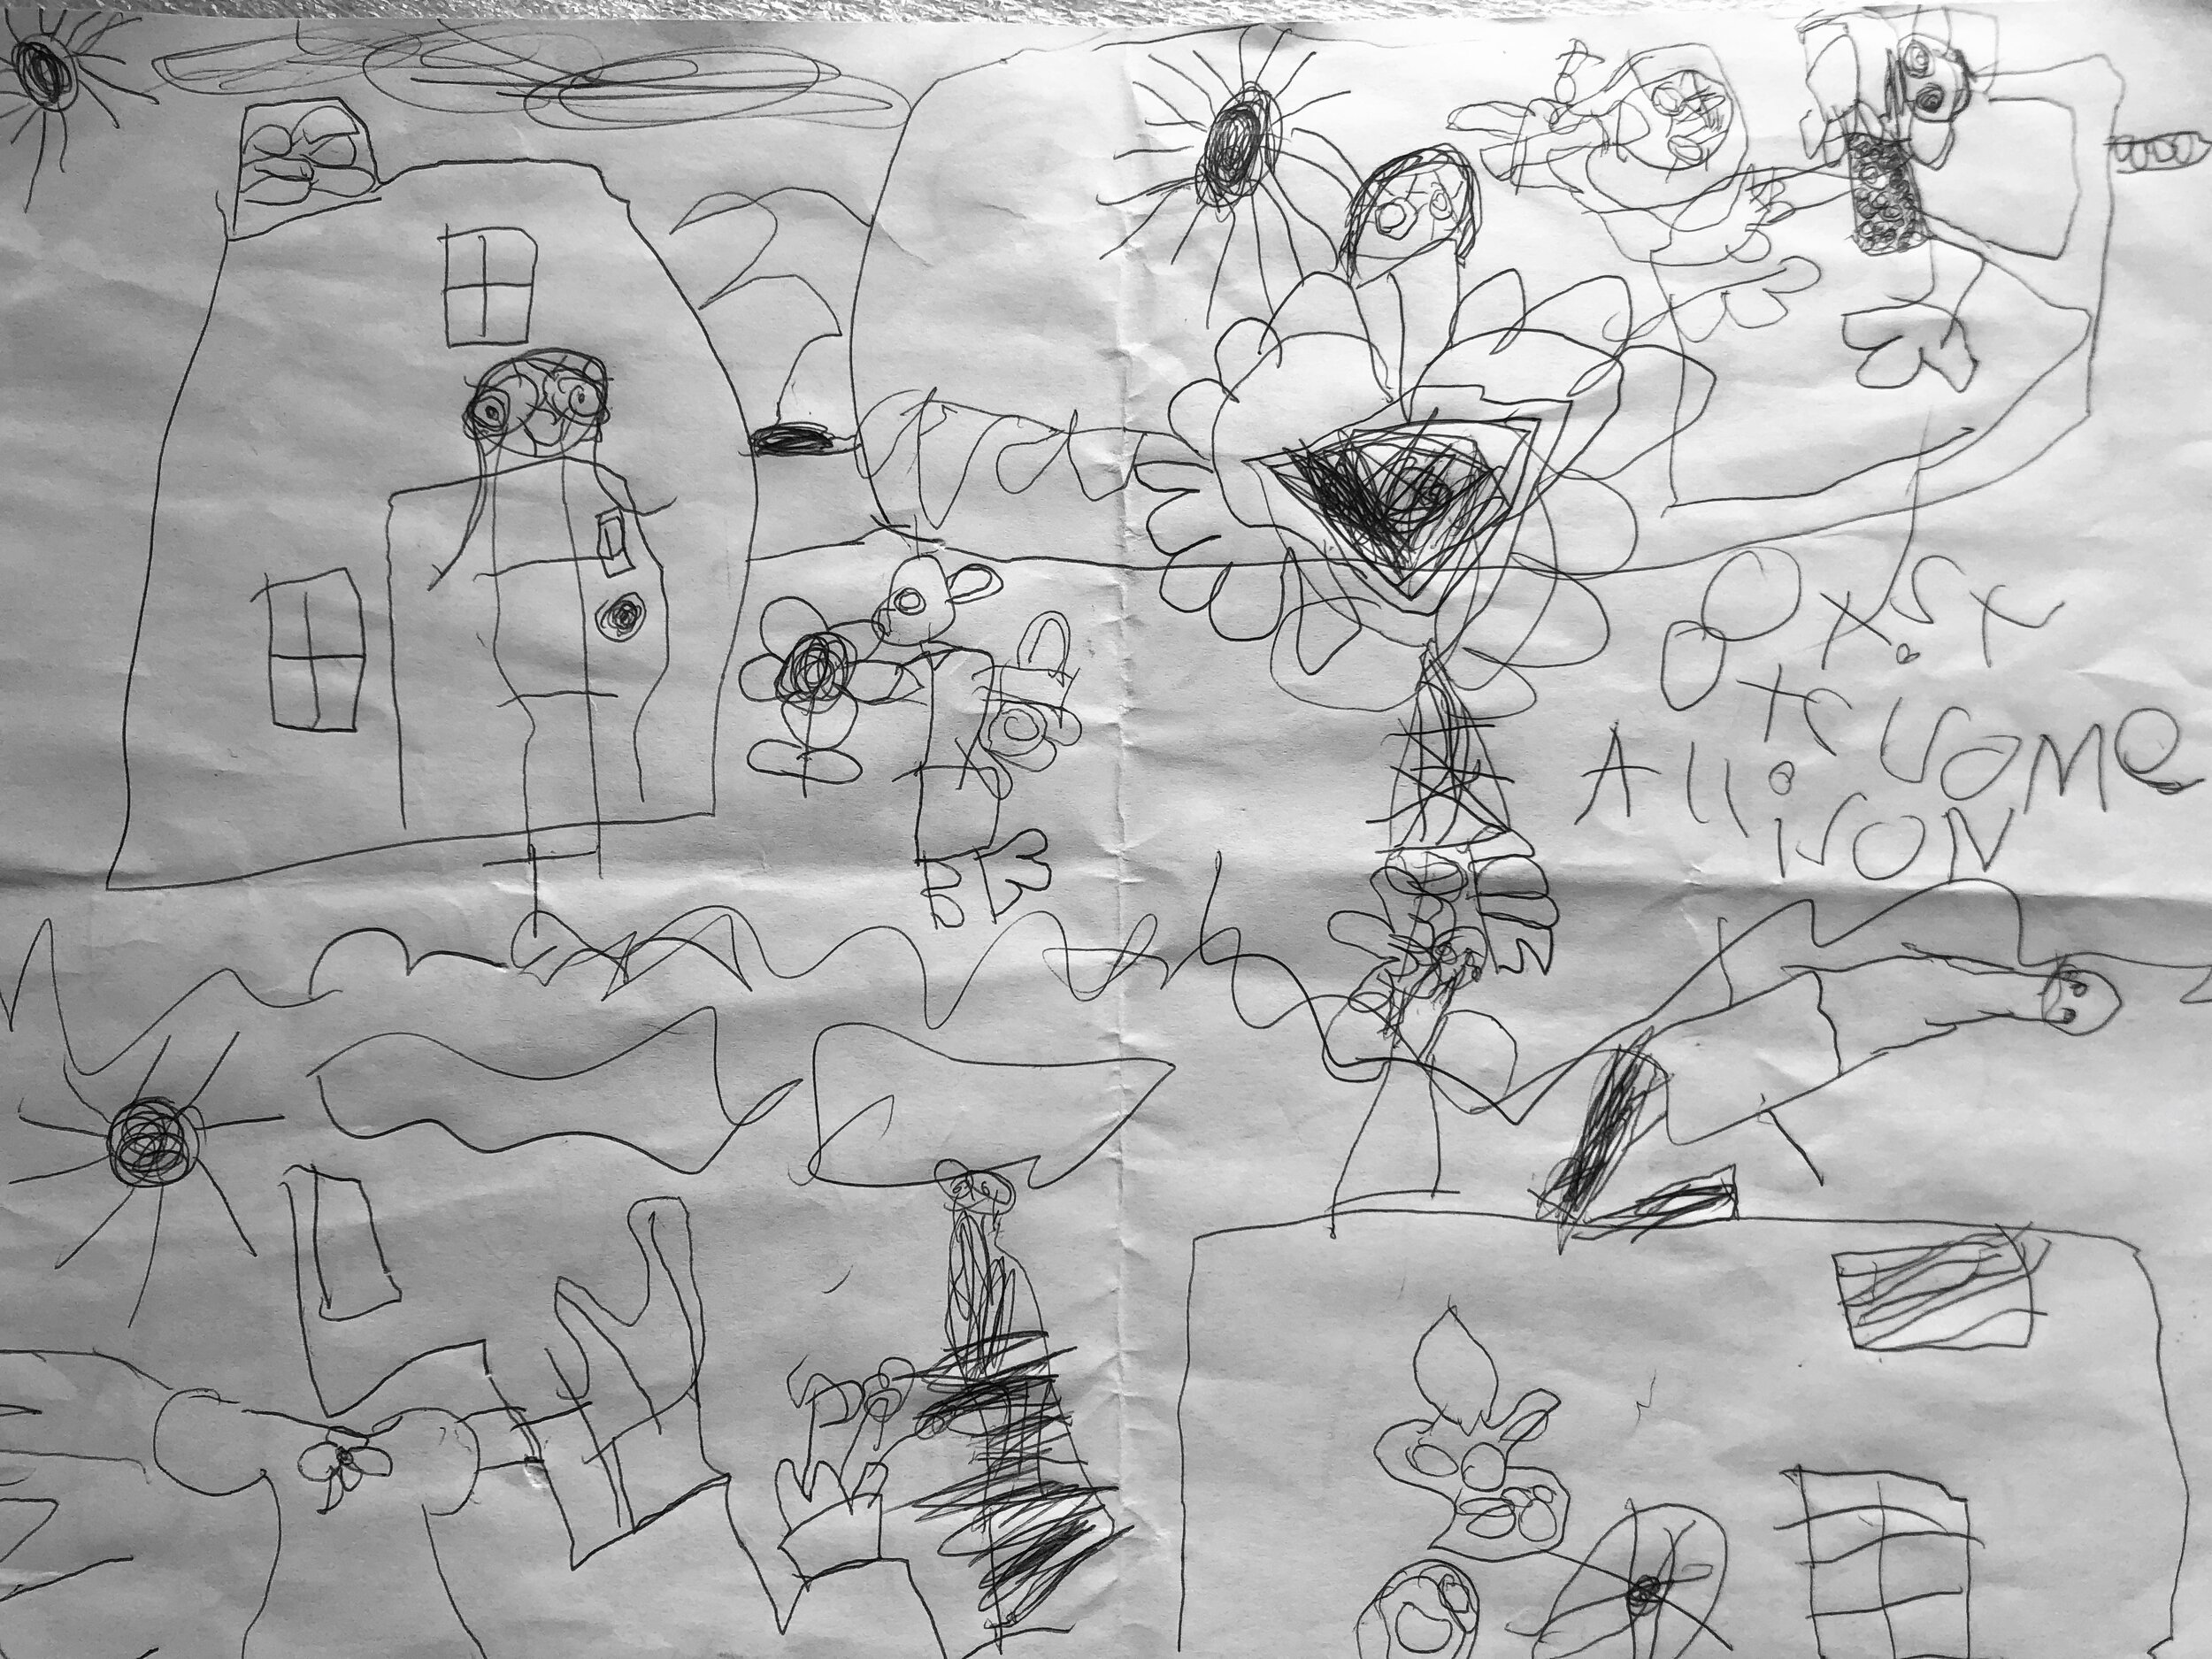 Original drawing by my daughter, Allison, at age 4.